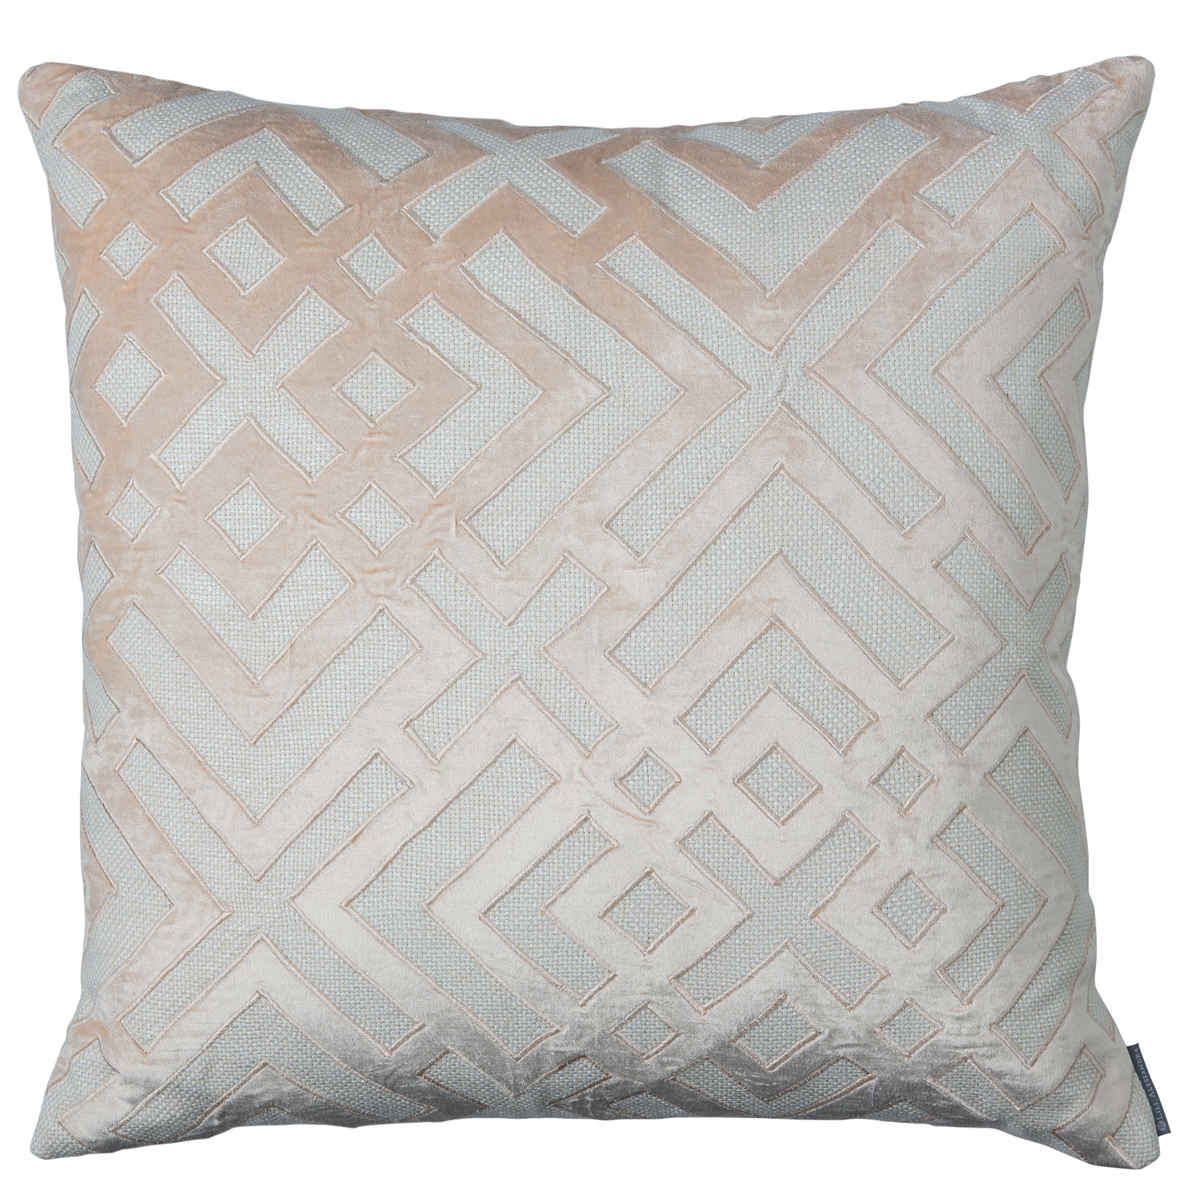 24x24 inch square decorative pillow covers